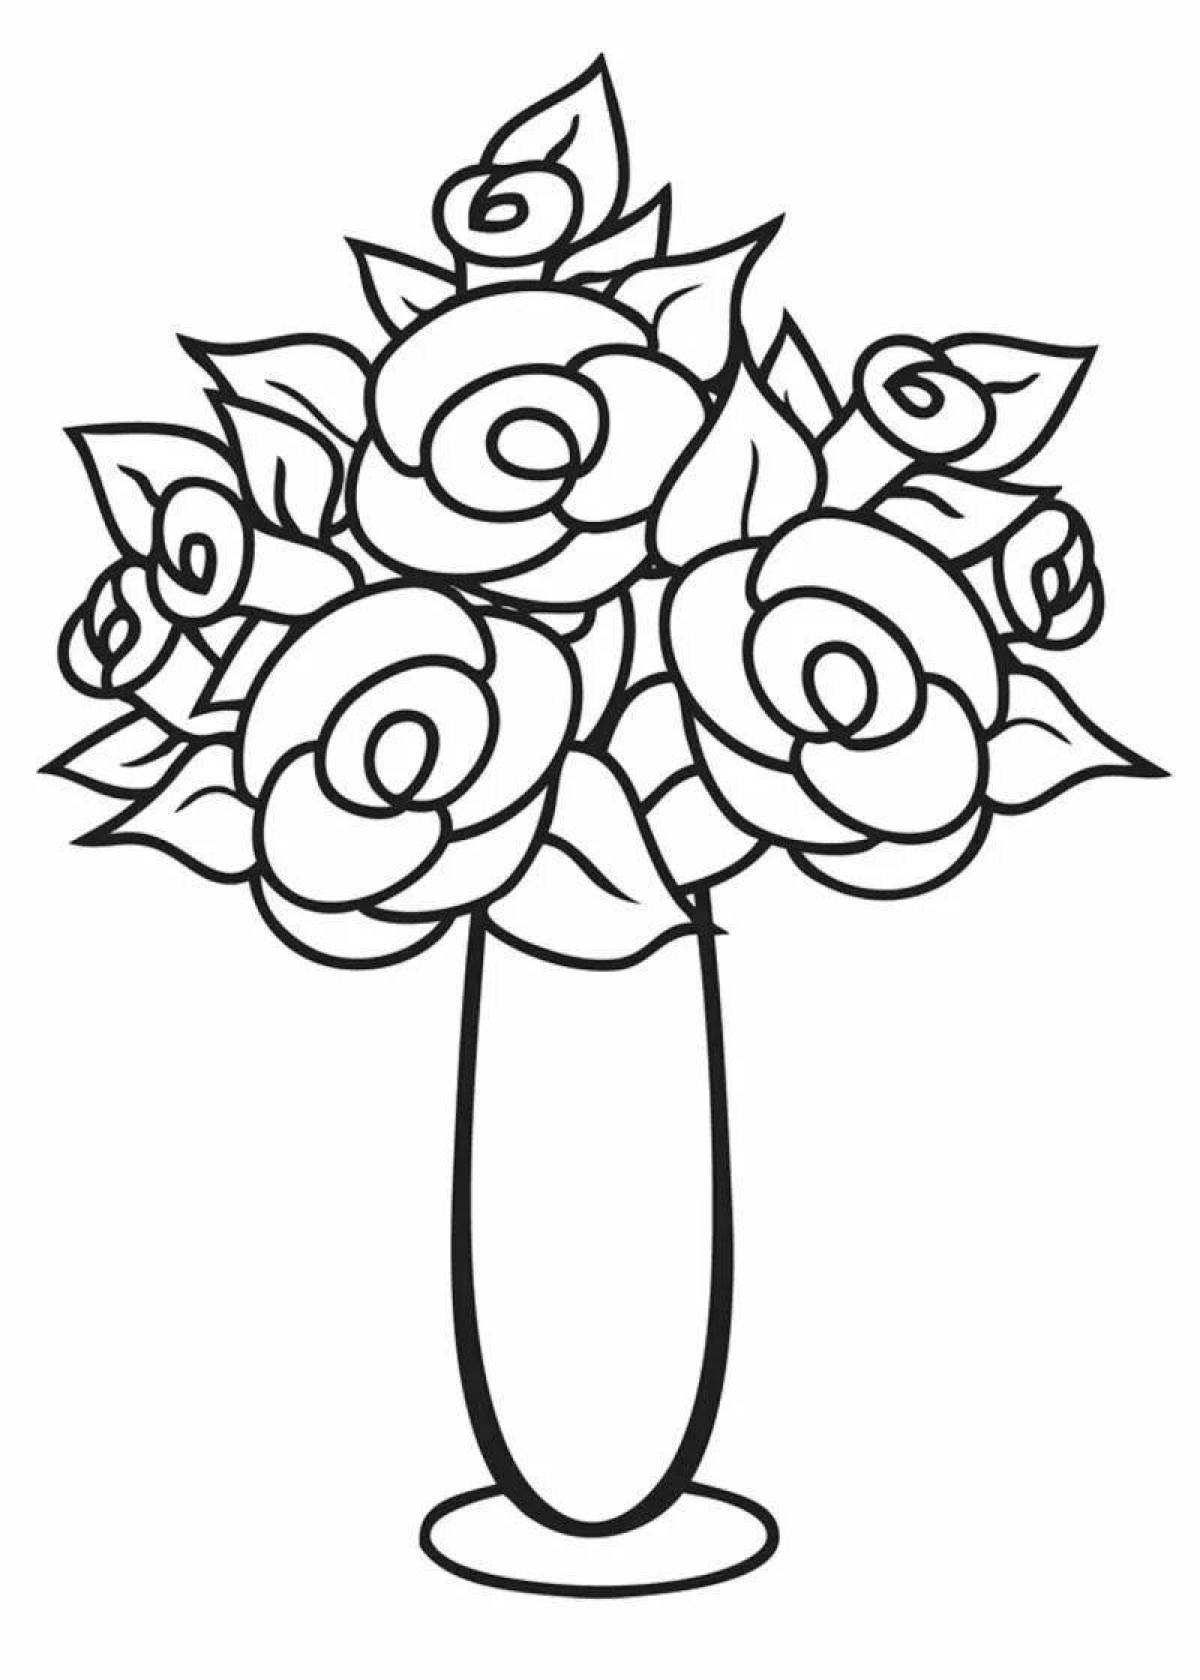 Fancy coloring of a rose in a vase